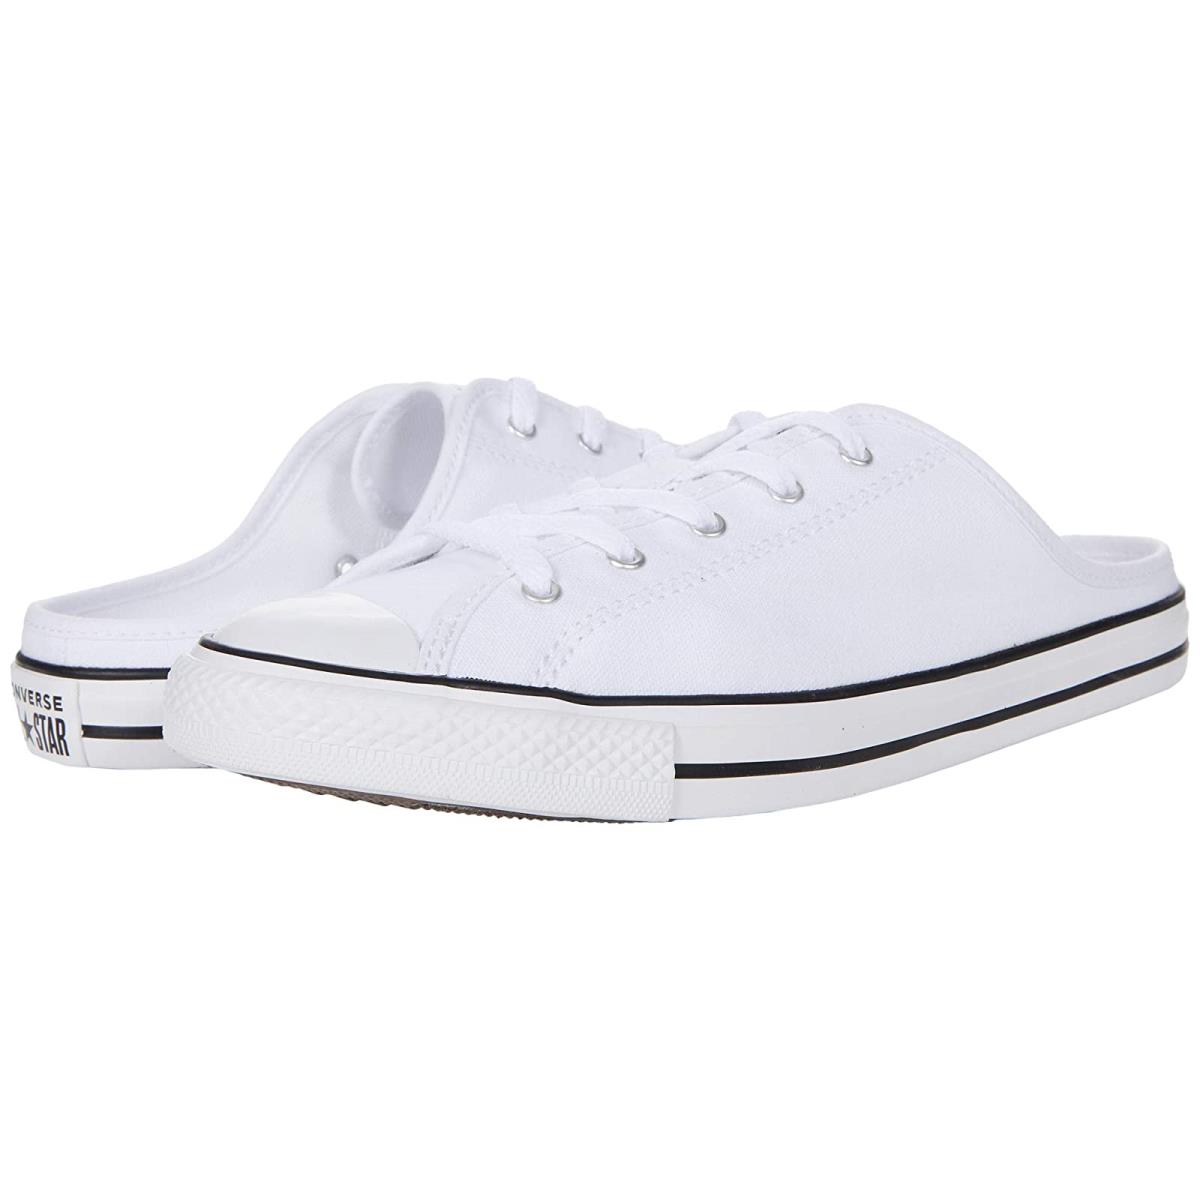 Woman`s Shoes Converse Chuck Taylor All Star Dainty Mule Slip-on White/Black/White